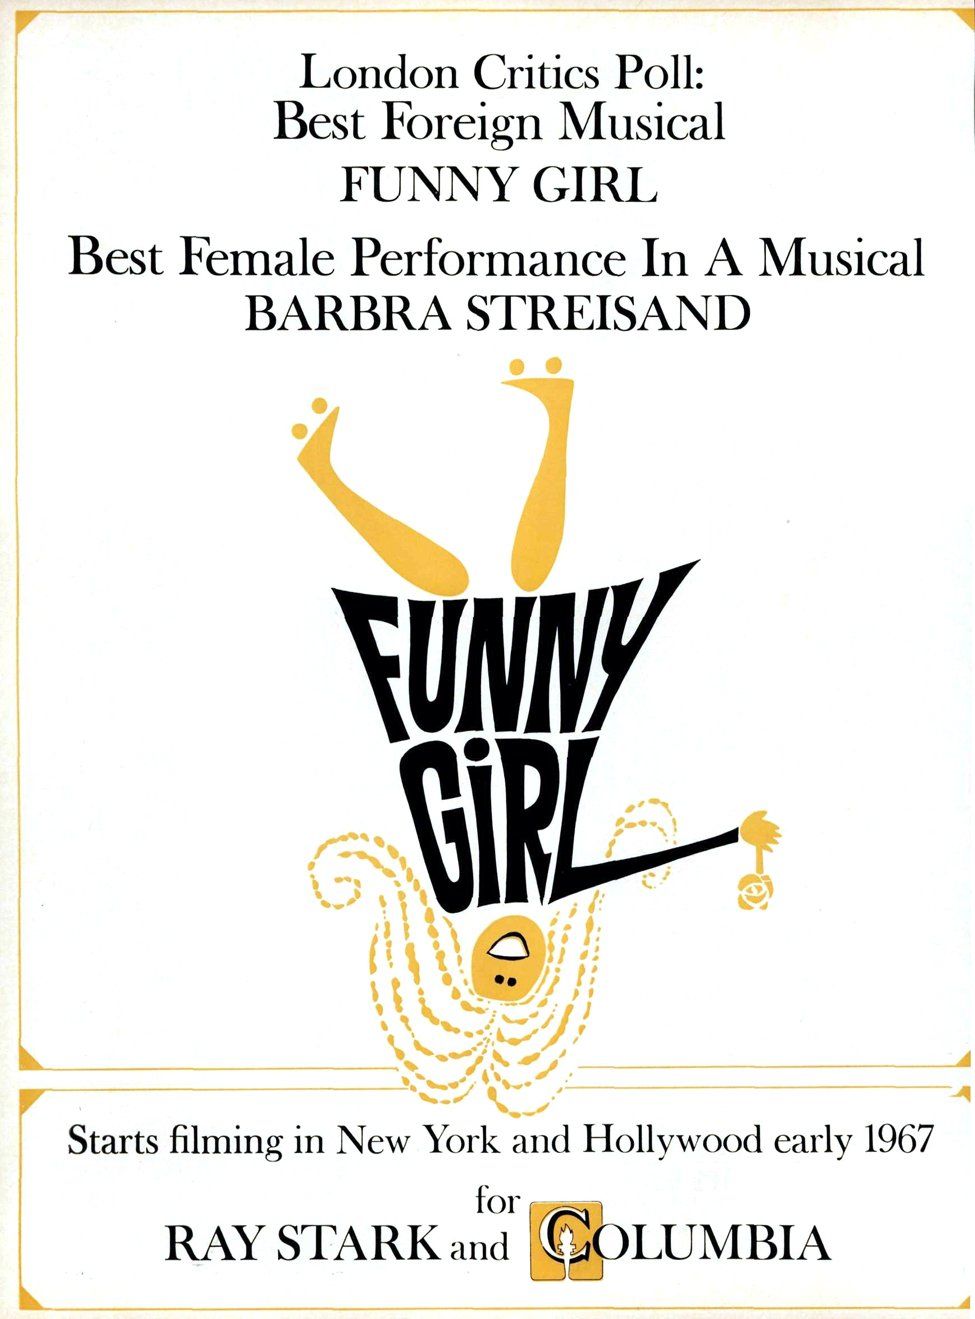 London Critics Poll ad for Best Musical and Female Performance for Funny Girl